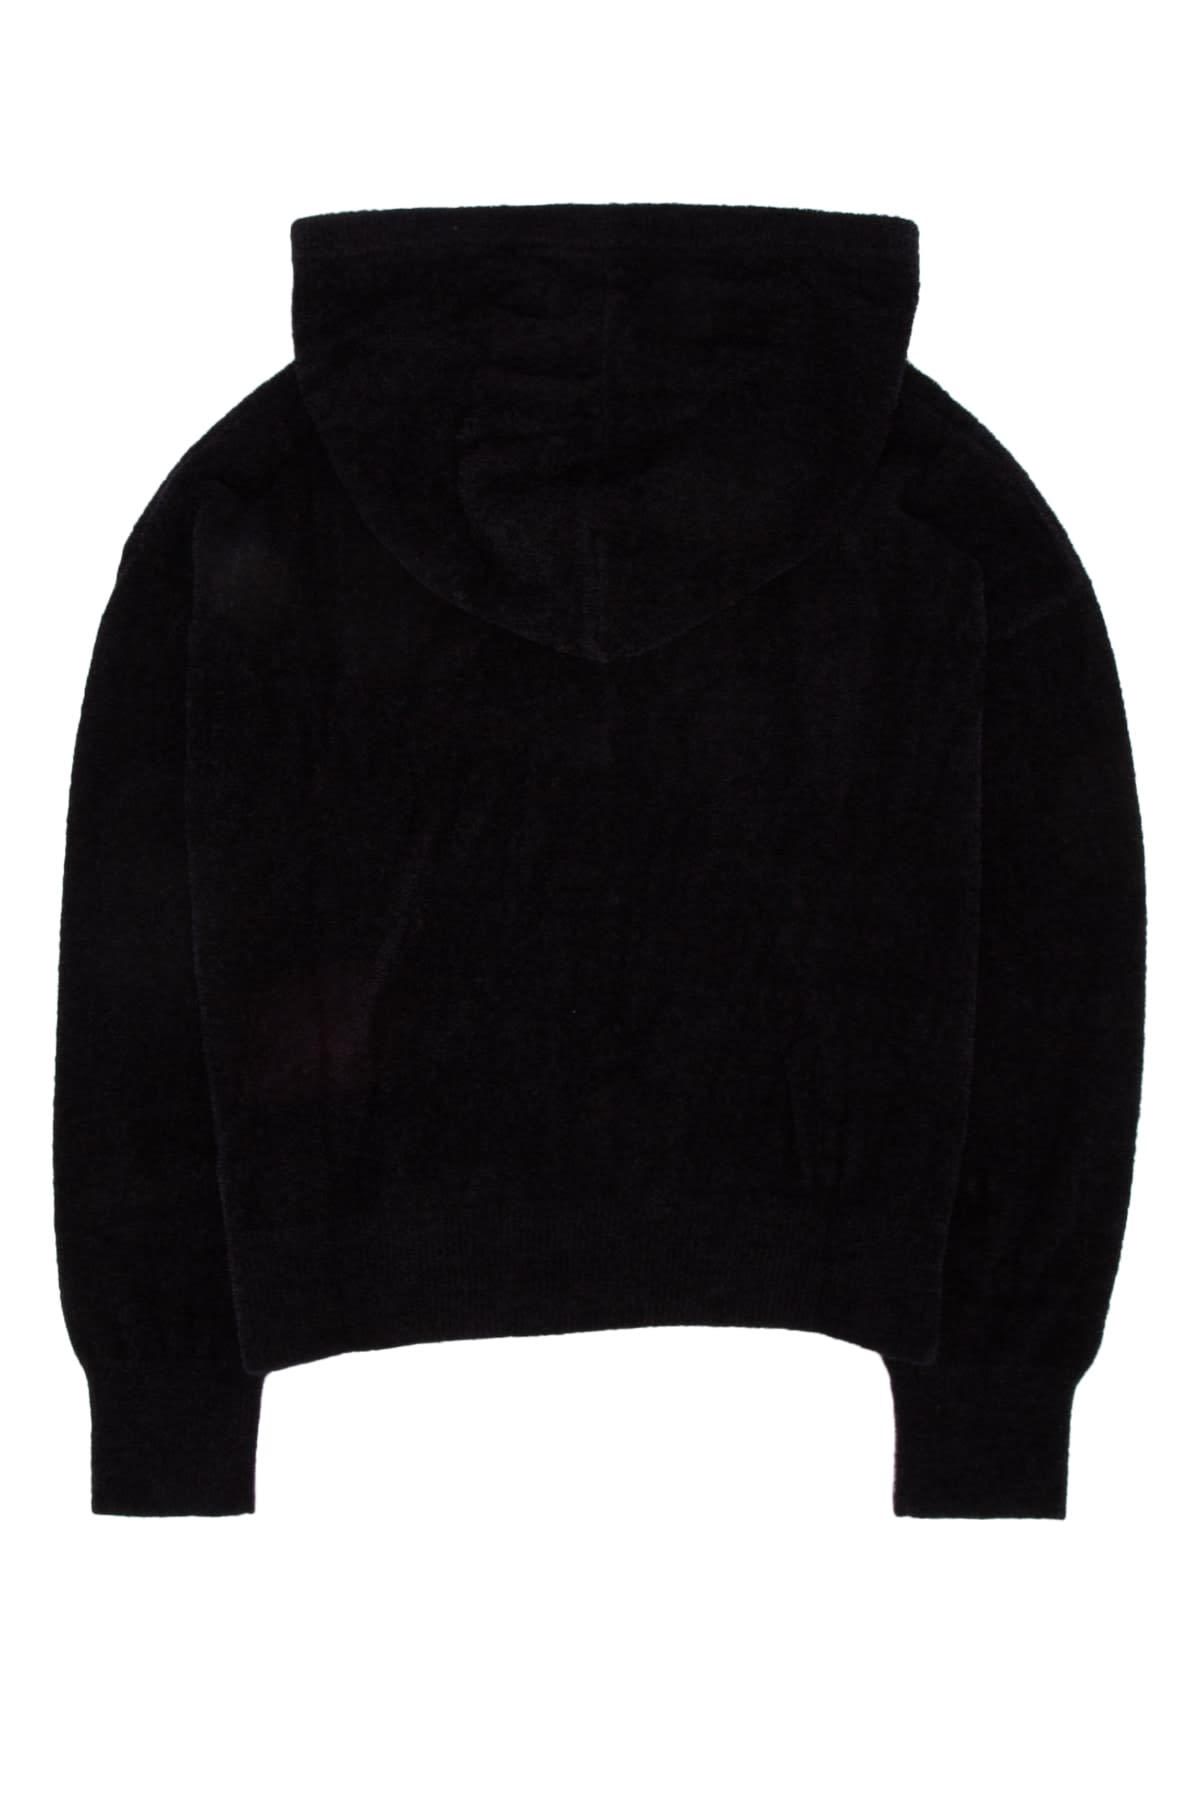 Givenchy Kids' Maglione In Black